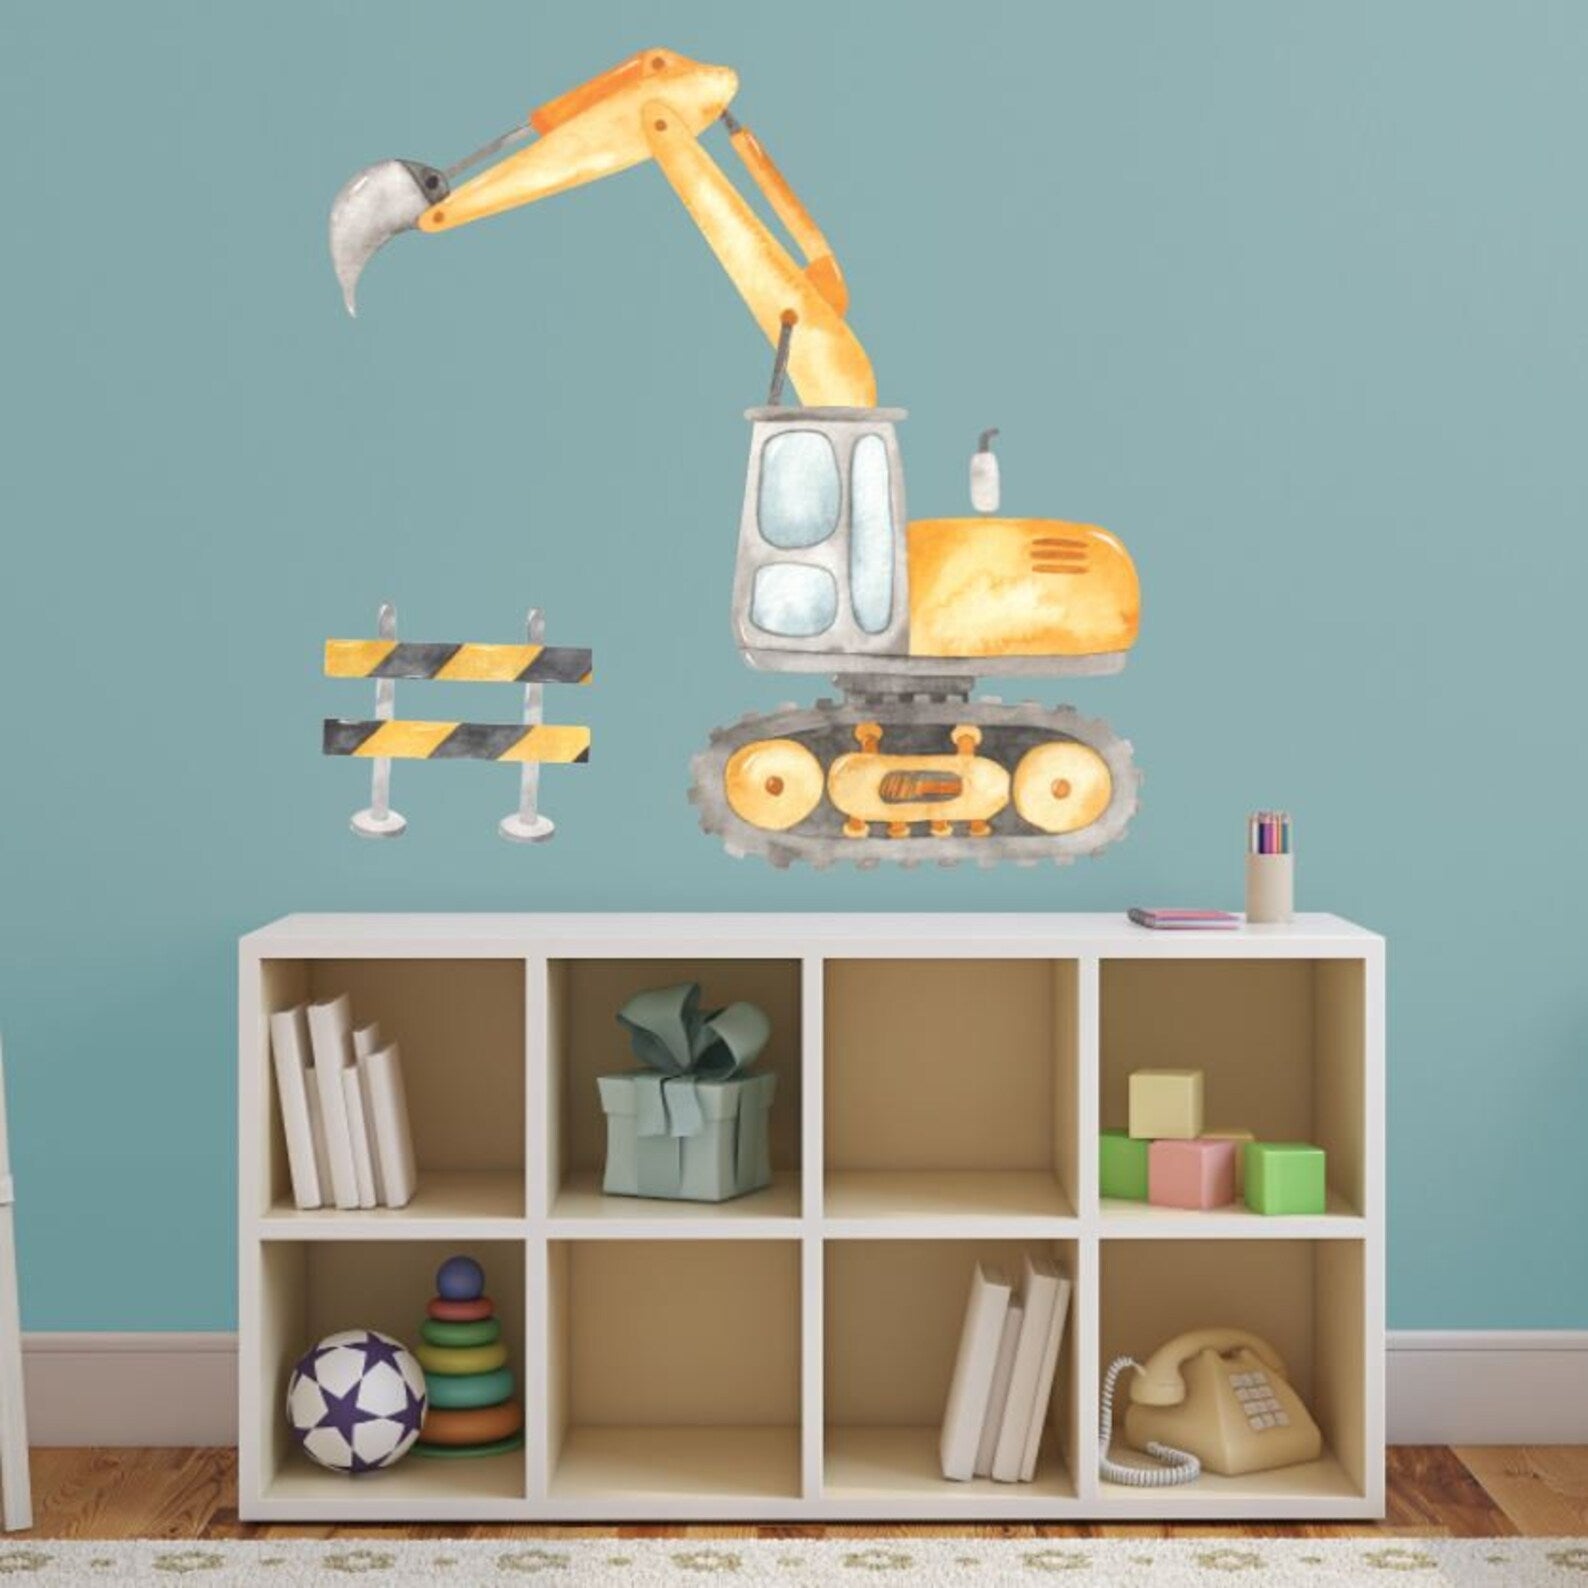 Construction Wall Decals | Bulldozer & Dump Truck | Excavator | Green & Blue - Picture Perfect Decals